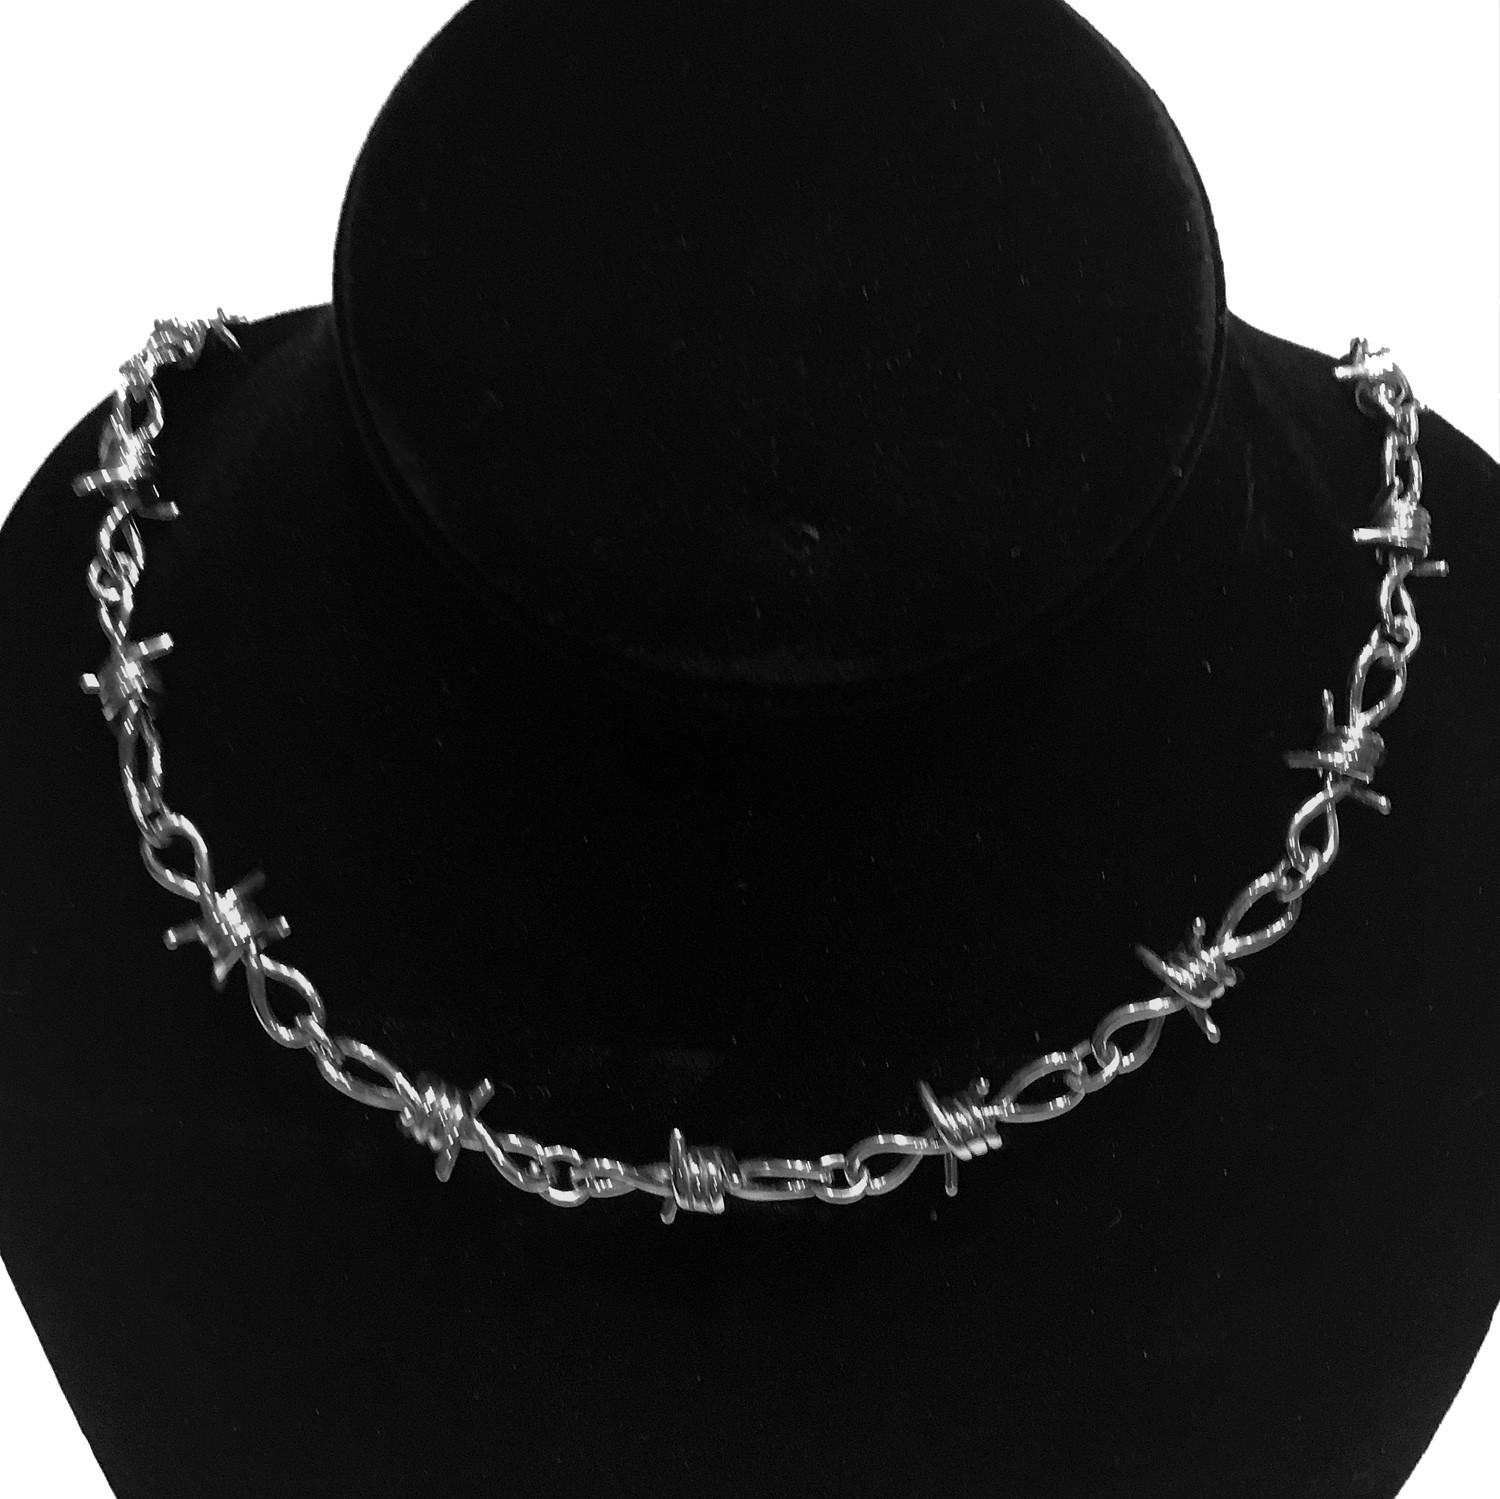 BARBWIRE CHAIN SHINY FINISH SILVER 11MM STAINLESS STEEL 24